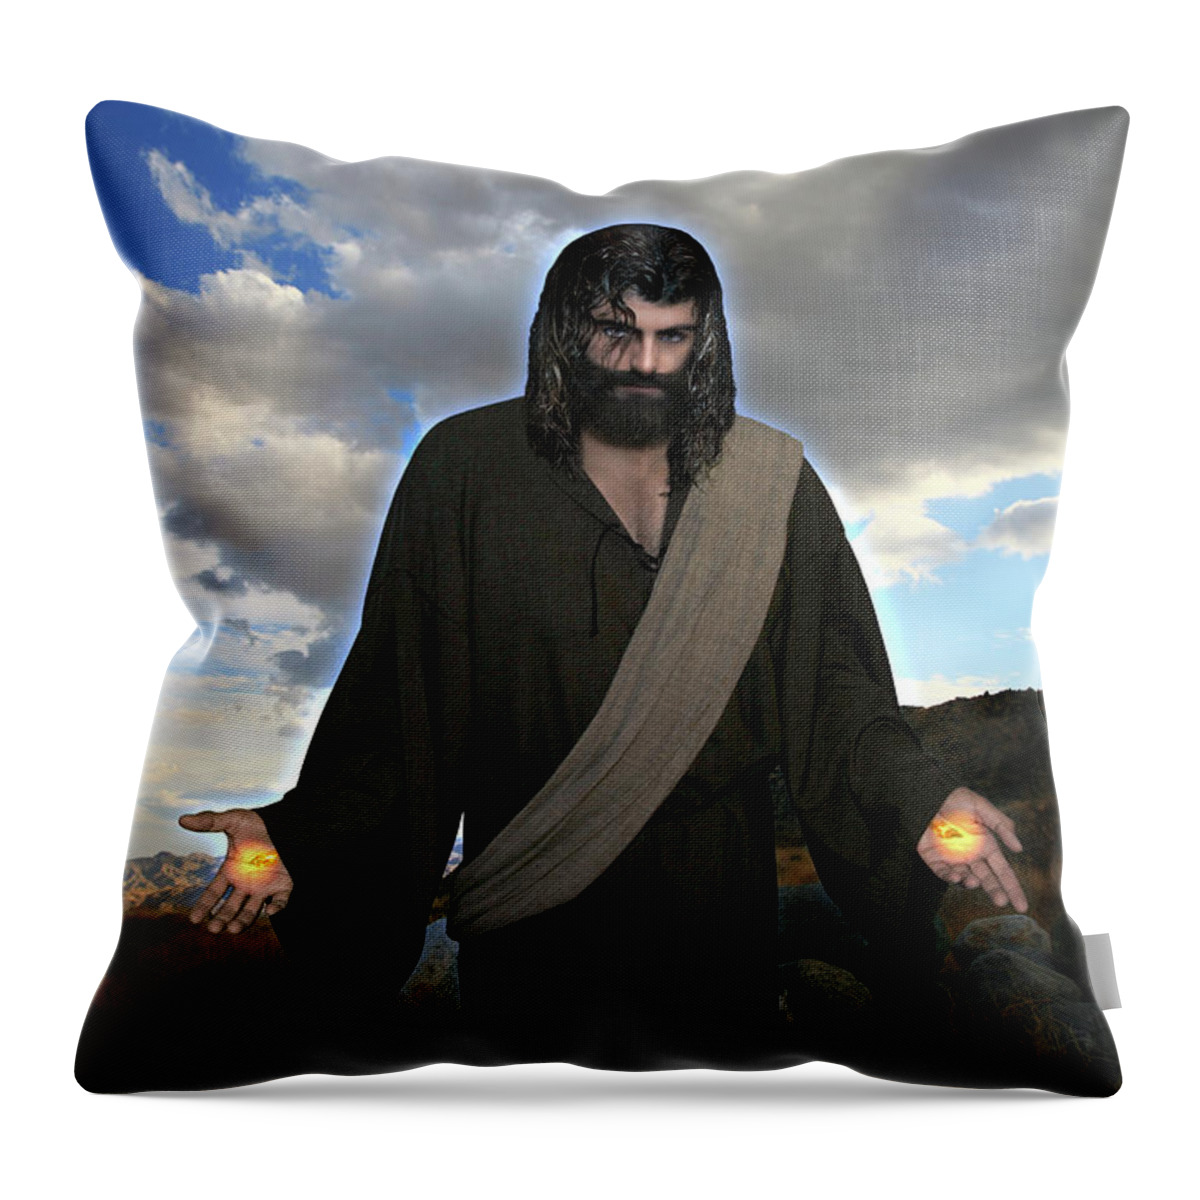 Alex-acropolis-calderon Throw Pillow featuring the photograph Jesus Christ- And He Withdrew Himself Into The Wilderness And Prayed by Acropolis De Versailles